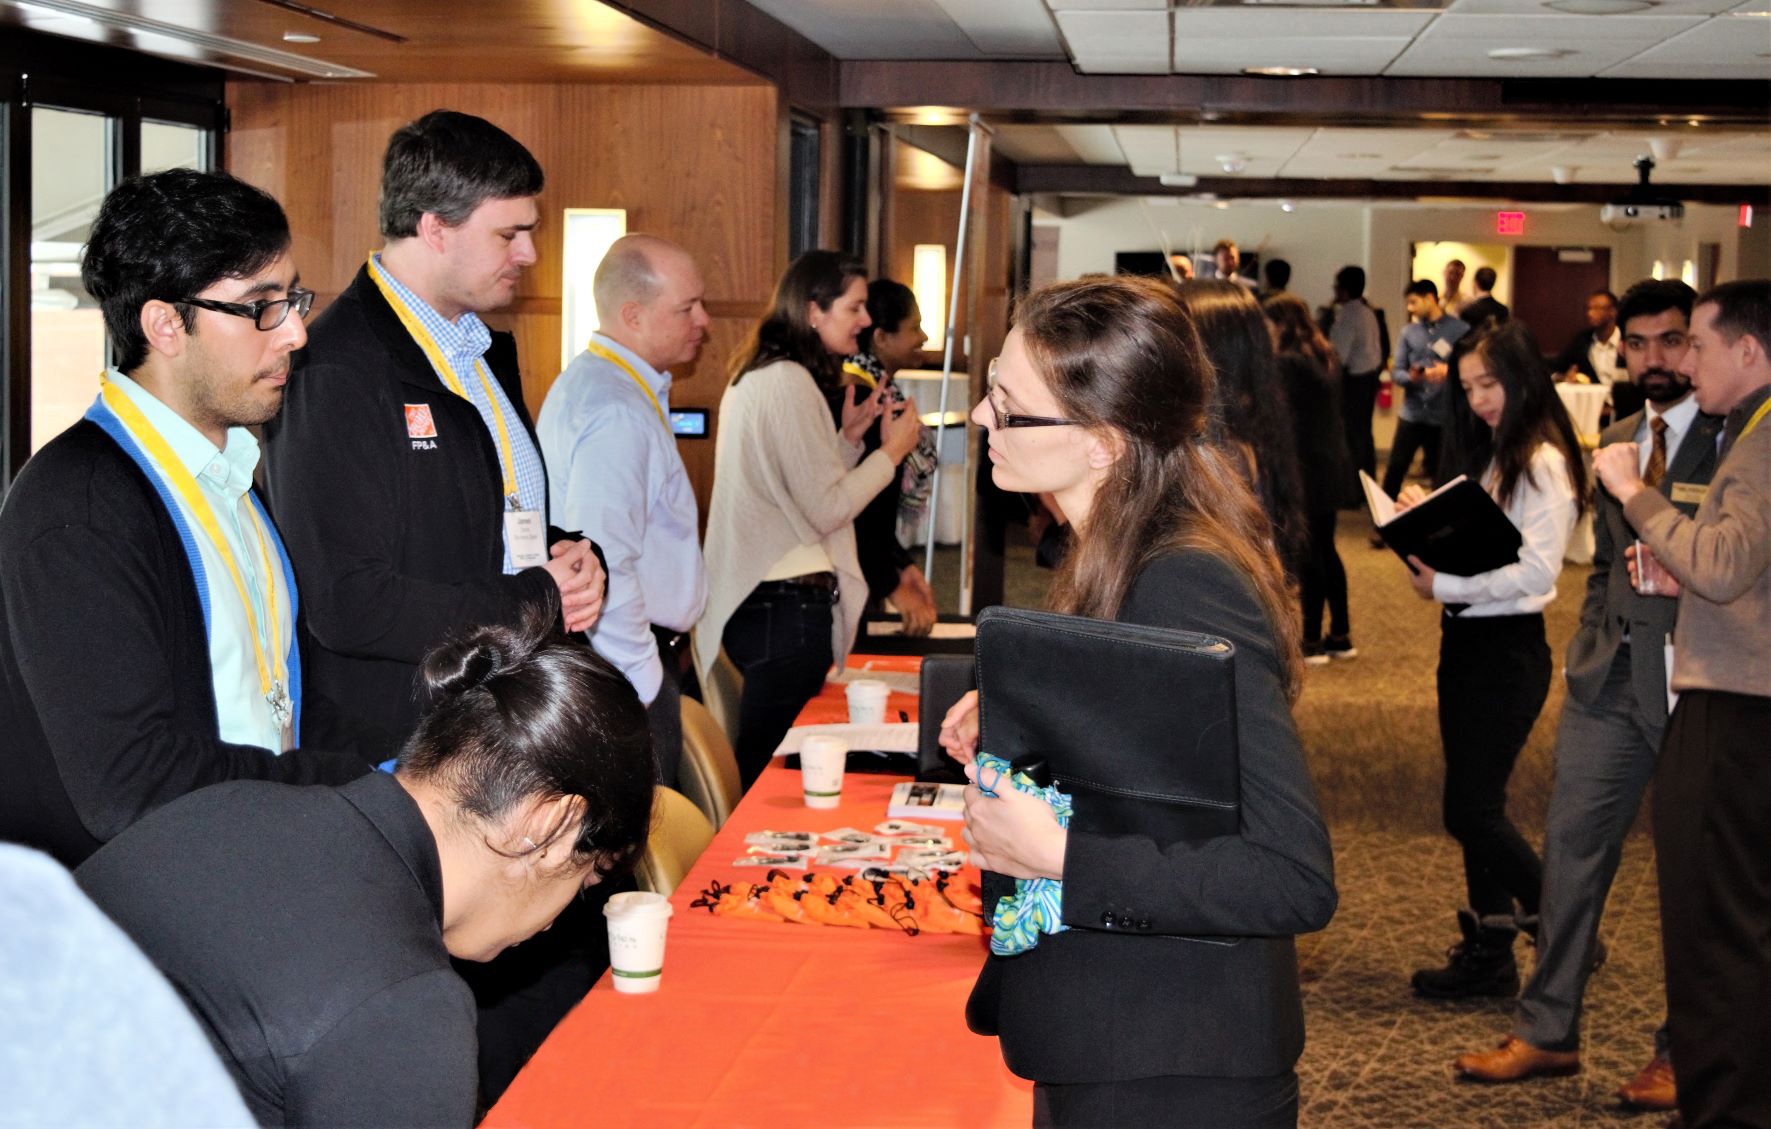 Students were able to meet with company sponsors to discuss internship and employment opportunities.